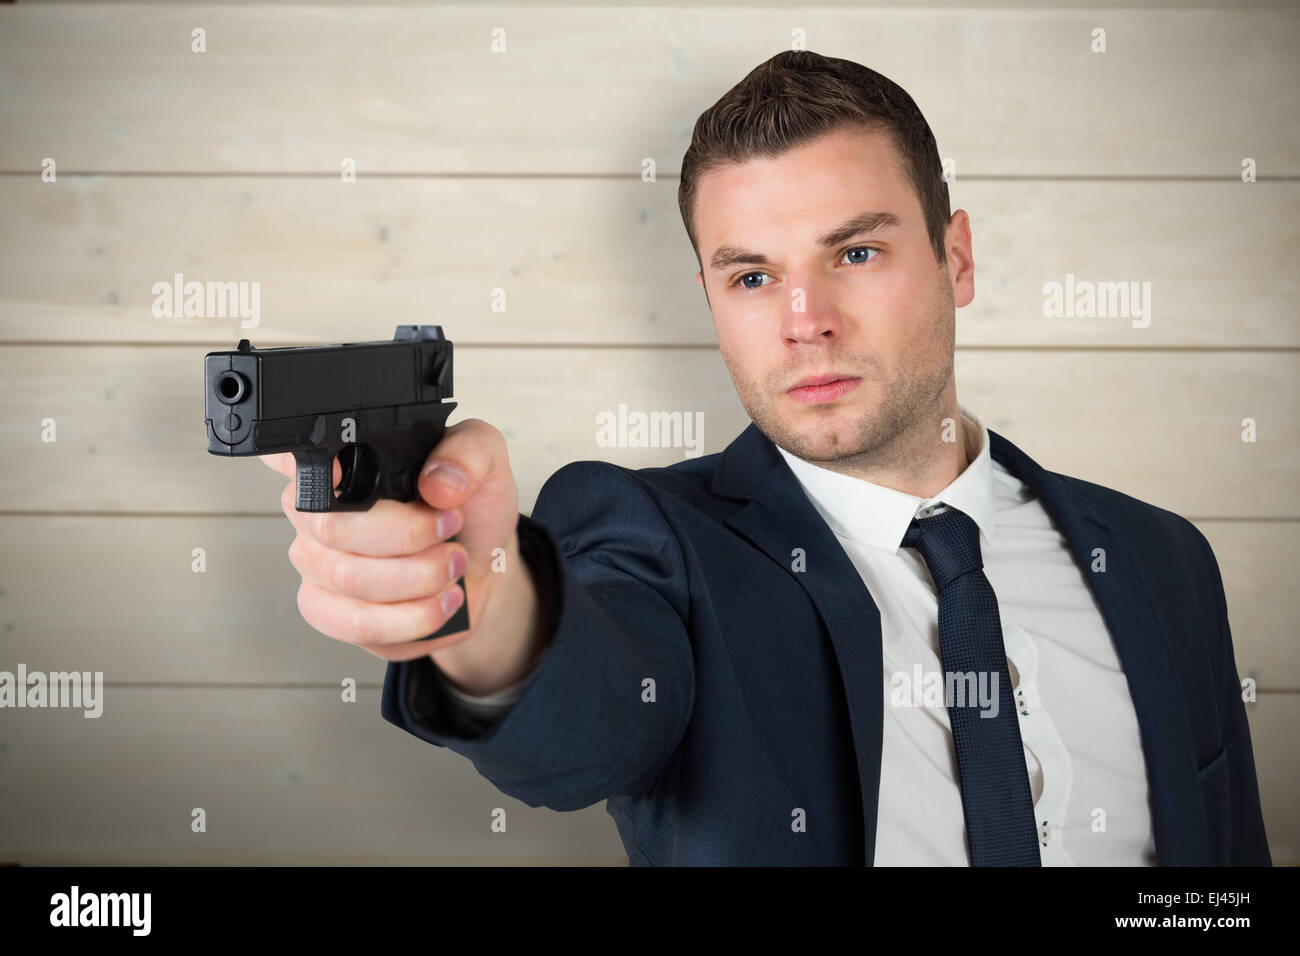 Composite image of serious businessman pointing a gun Stock Photo